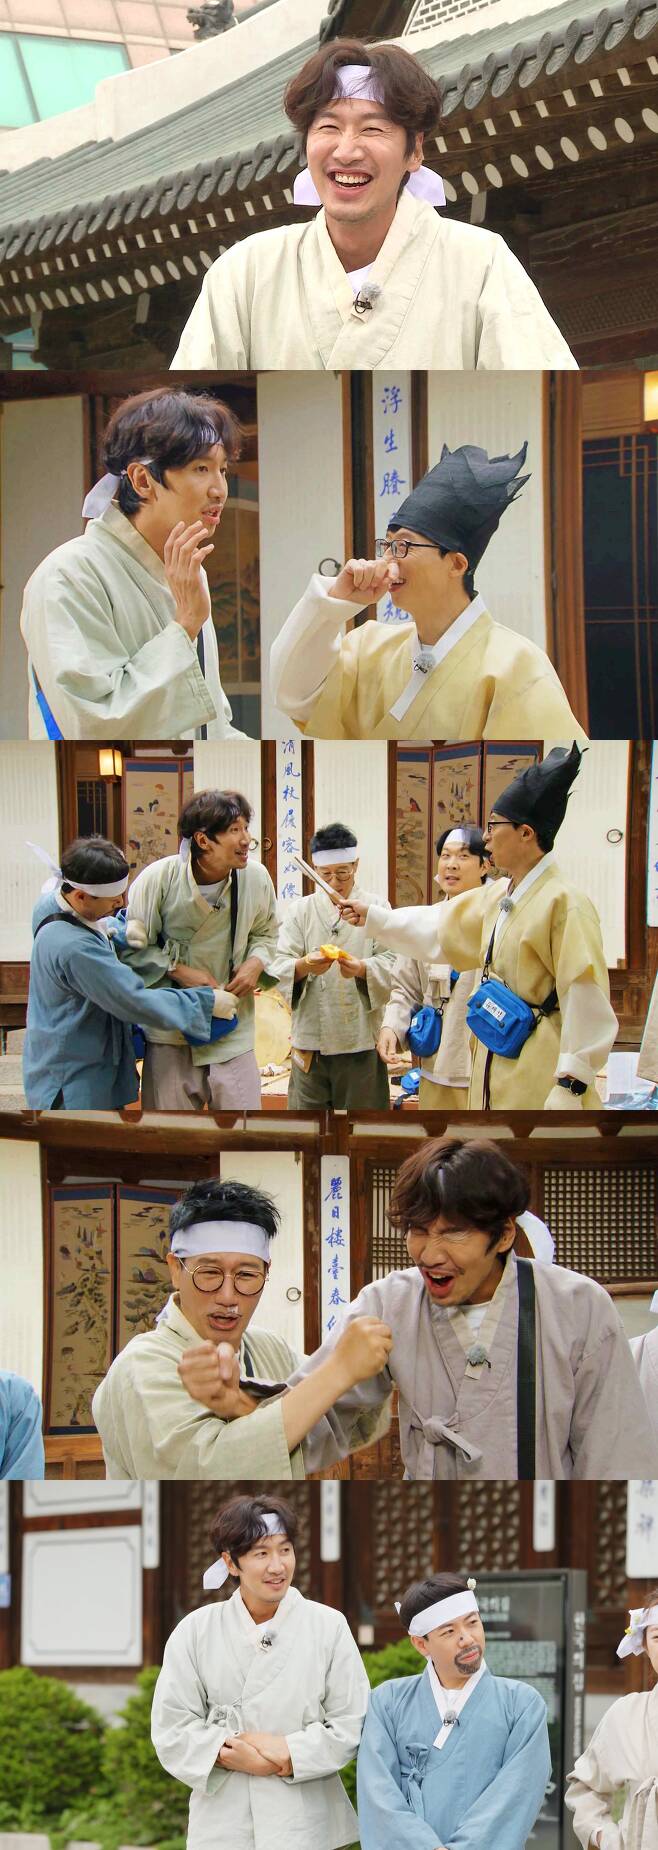 On SBSs Running Man, which will be broadcast on the 6th (Sun), Lee Kwang-soo and his members, who are about to get off, will draw a farewell formula.The members who met for the first time since the article got off the air last week started to start Lee Kwang-soo as soon as the filming started, saying, I get off.The members showed up until the second stage of the departure, Ha: If I recruit my members, Cha: Cha Eun-woo, Cha Tae-hyun, and made the scene laugh.What will the last dinner be? Lee Kwang-soos departure news was pleasantly melted in the Running Man Style .Following last week, members of this week will constantly mention the departure, and Lee Kwang-soos era will continue.On this day, the members who turned into a head of the game were treated to Yoo Jae-Suk, who was the head of the race. Yoo Jae-Suk opened the opening of the game, saying, It is a very messy thing to go out (to get off) to Lee Kwang-soo.Lee Kwang-soos betrayal also ran on the day, and Lee Kwang-soo was caught in a situation where he was caught secretly taking away other lobsters to receive more lobsters from Yoo Jae-Suk.The members said, Where are you going before you go out!On the other hand, Ji Seok-jin, who declared Crying a Cross once a time until he gets off, shouted a Cross again and made a sense of clutter.The beautiful farewell formula with Lee Kwang-soo, who is Running Man, will be released at Running Man, which will be broadcast at 5 pm on Sunday, 6th.iMBC Photos Offered: SBS